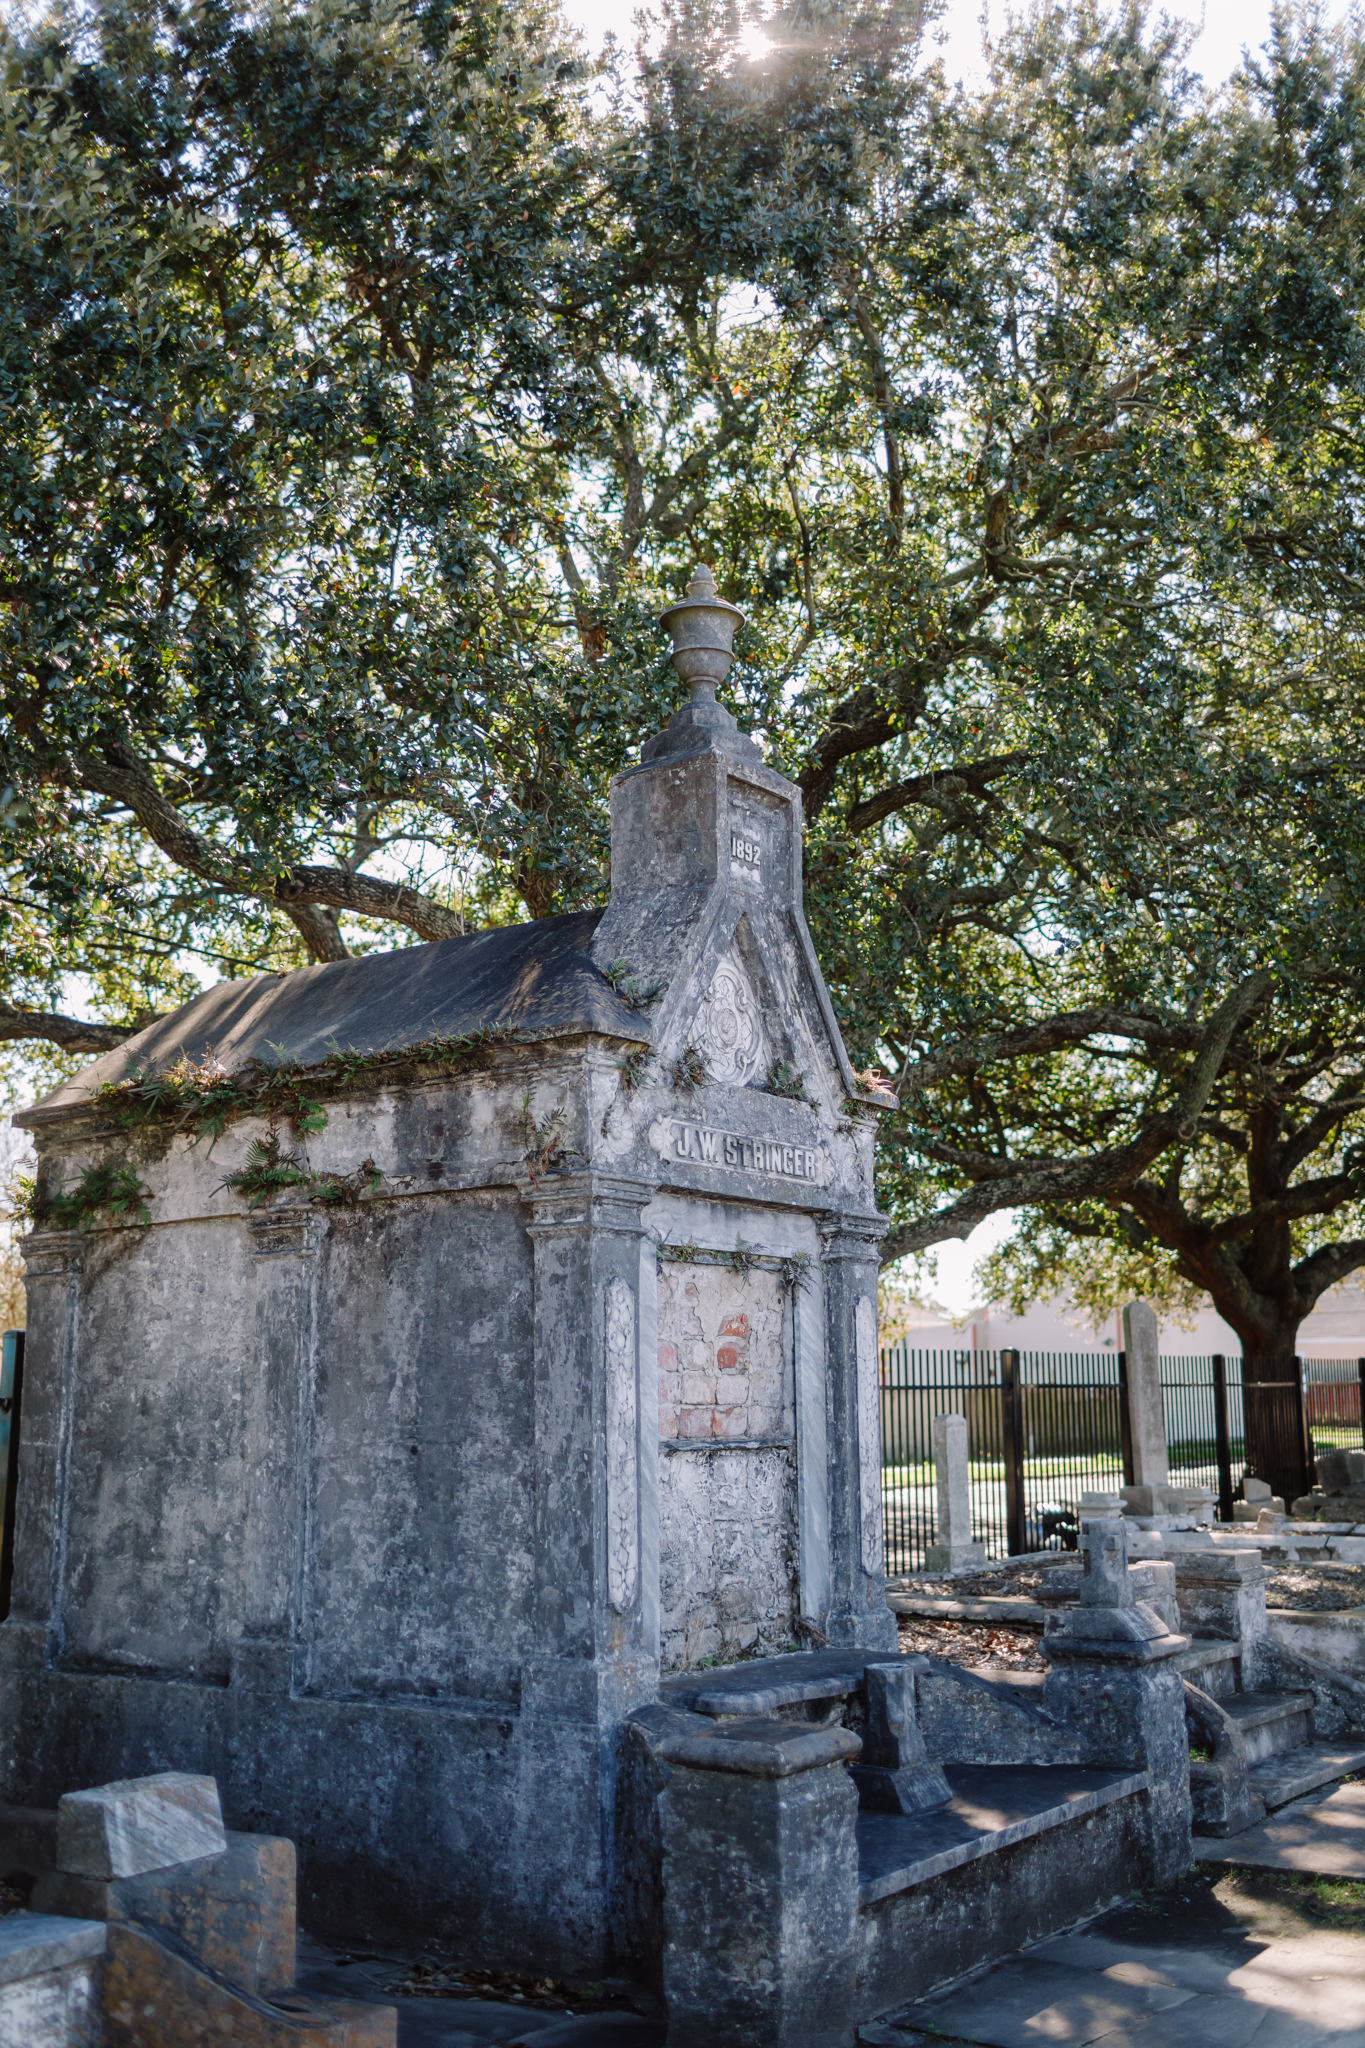 Beautiful tomb in New Orleans cemetery